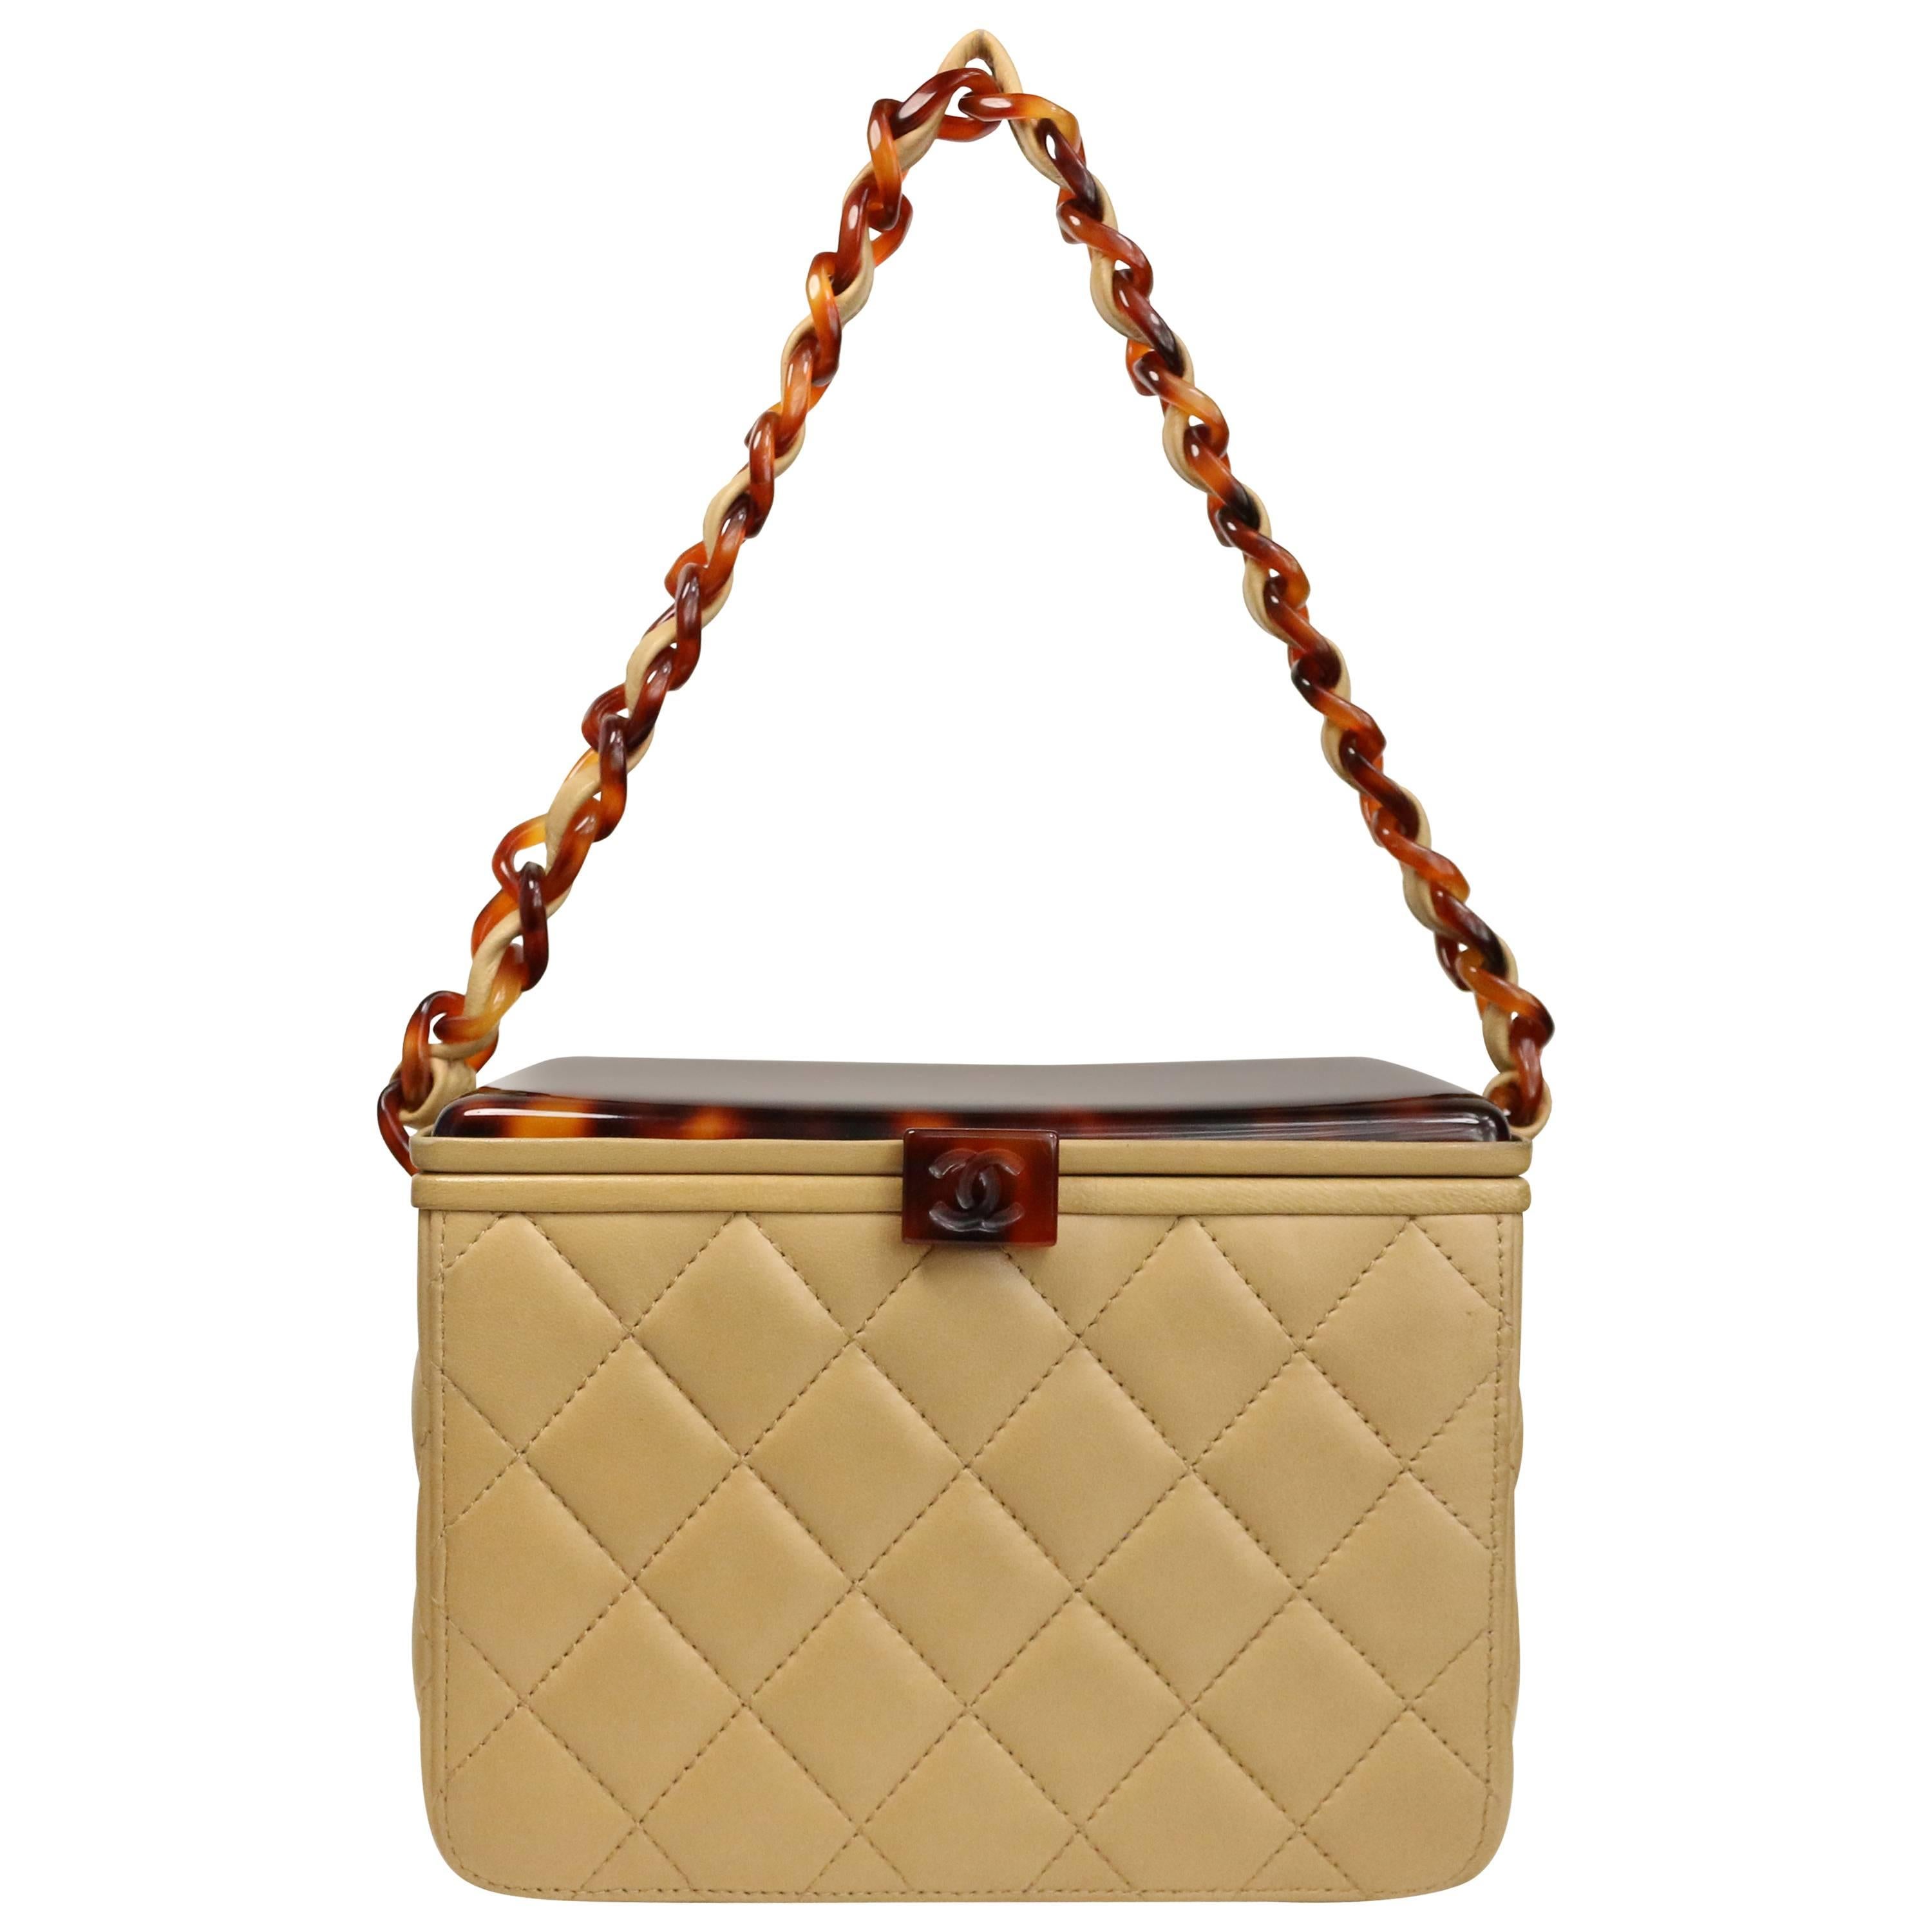 Chanel Beige Leather Quilted Tortoise Lucite Top Box Bag